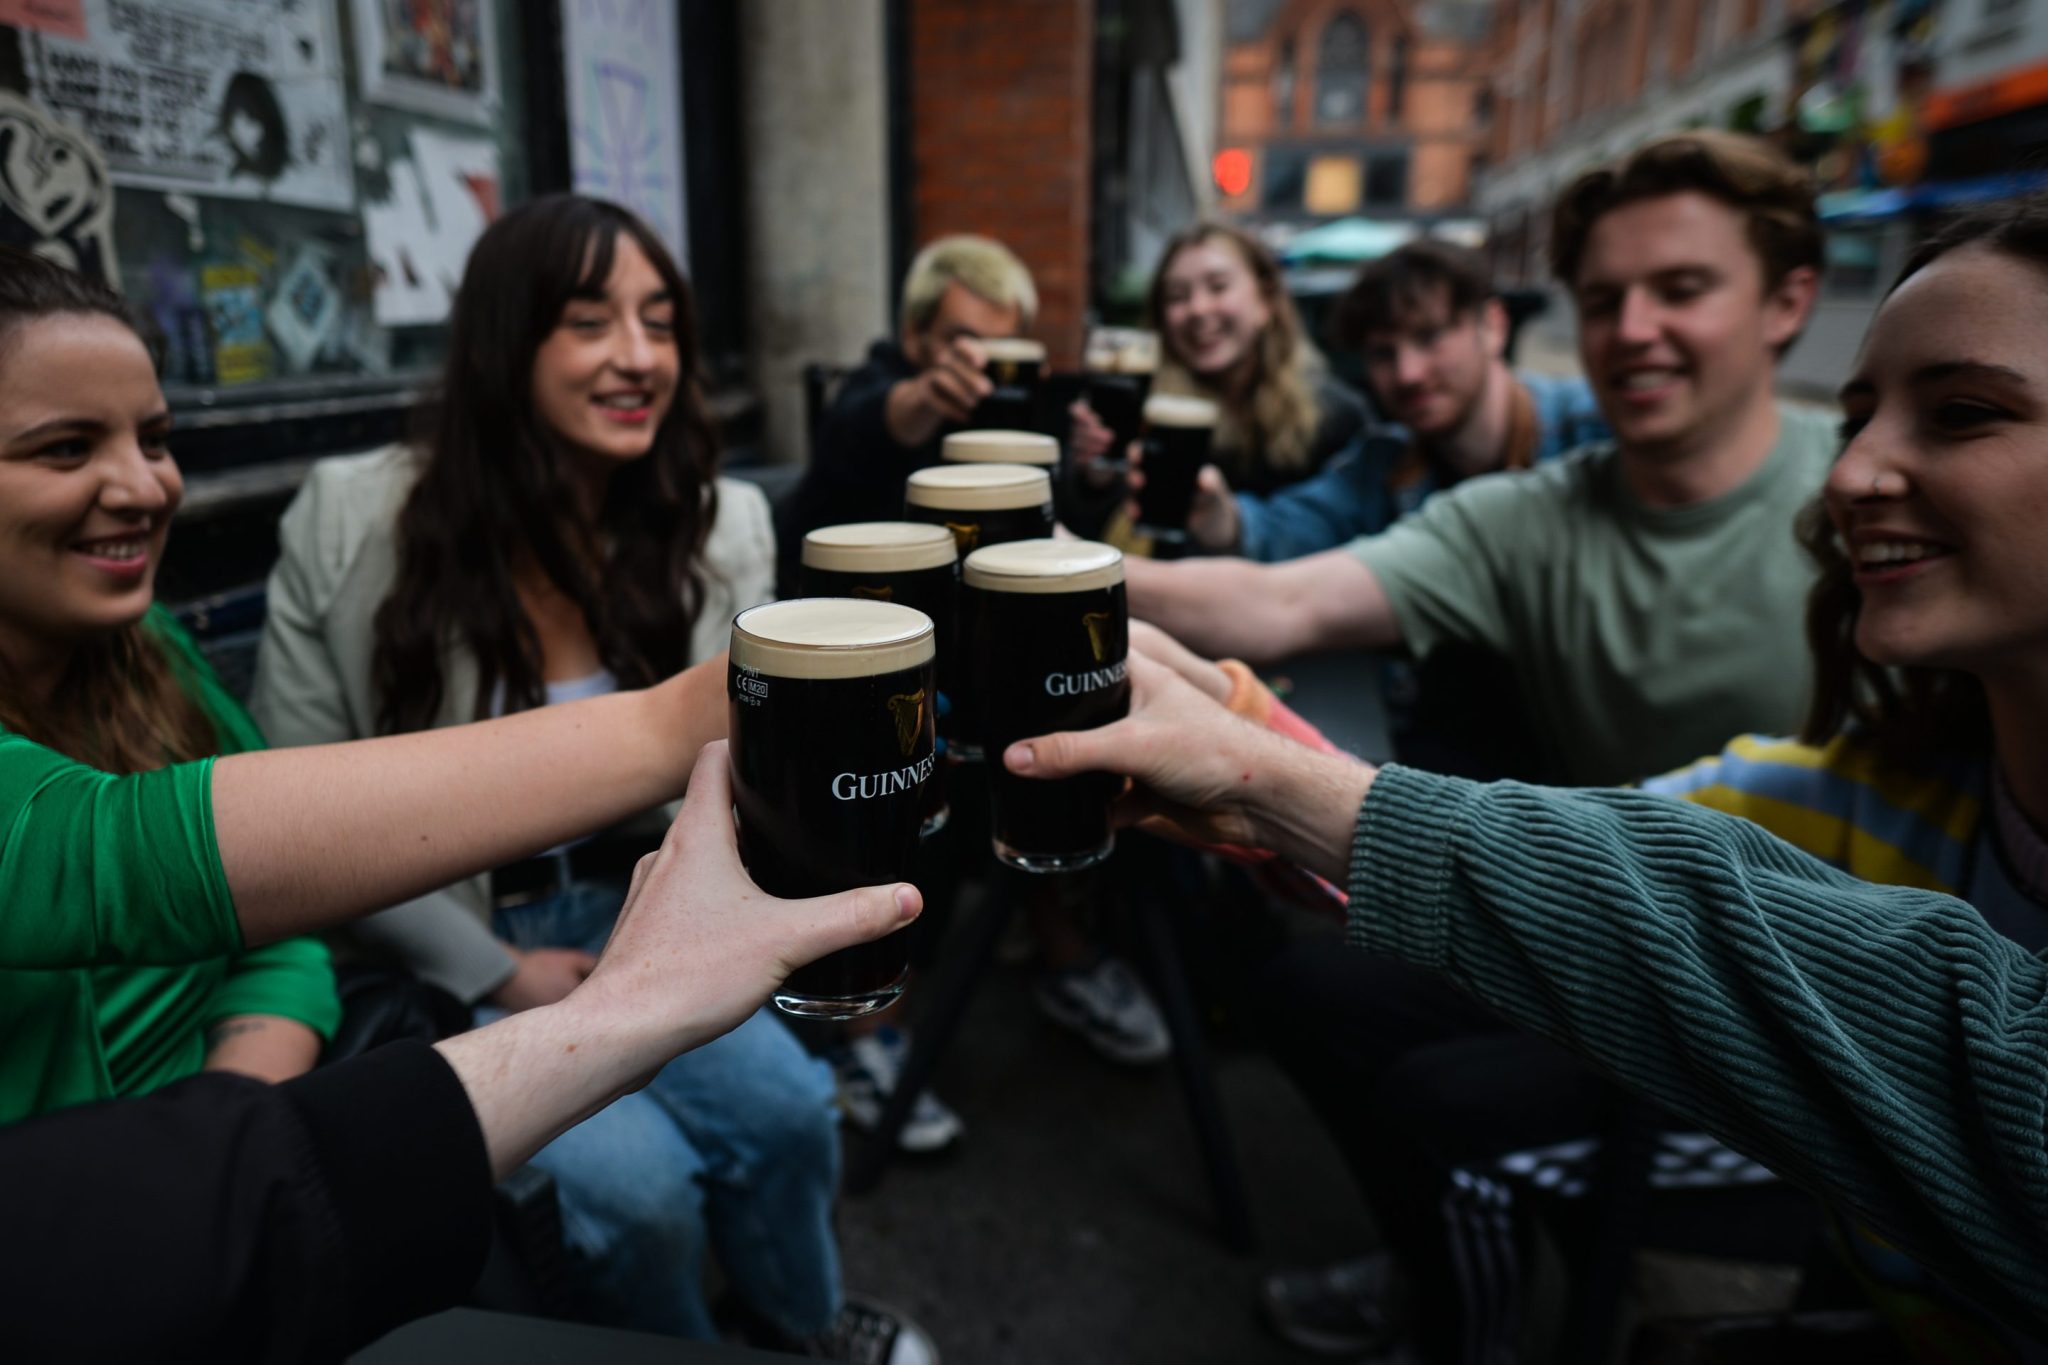 Guinness is entering a ‘golden age’ thanks to social media-obsessed millennials